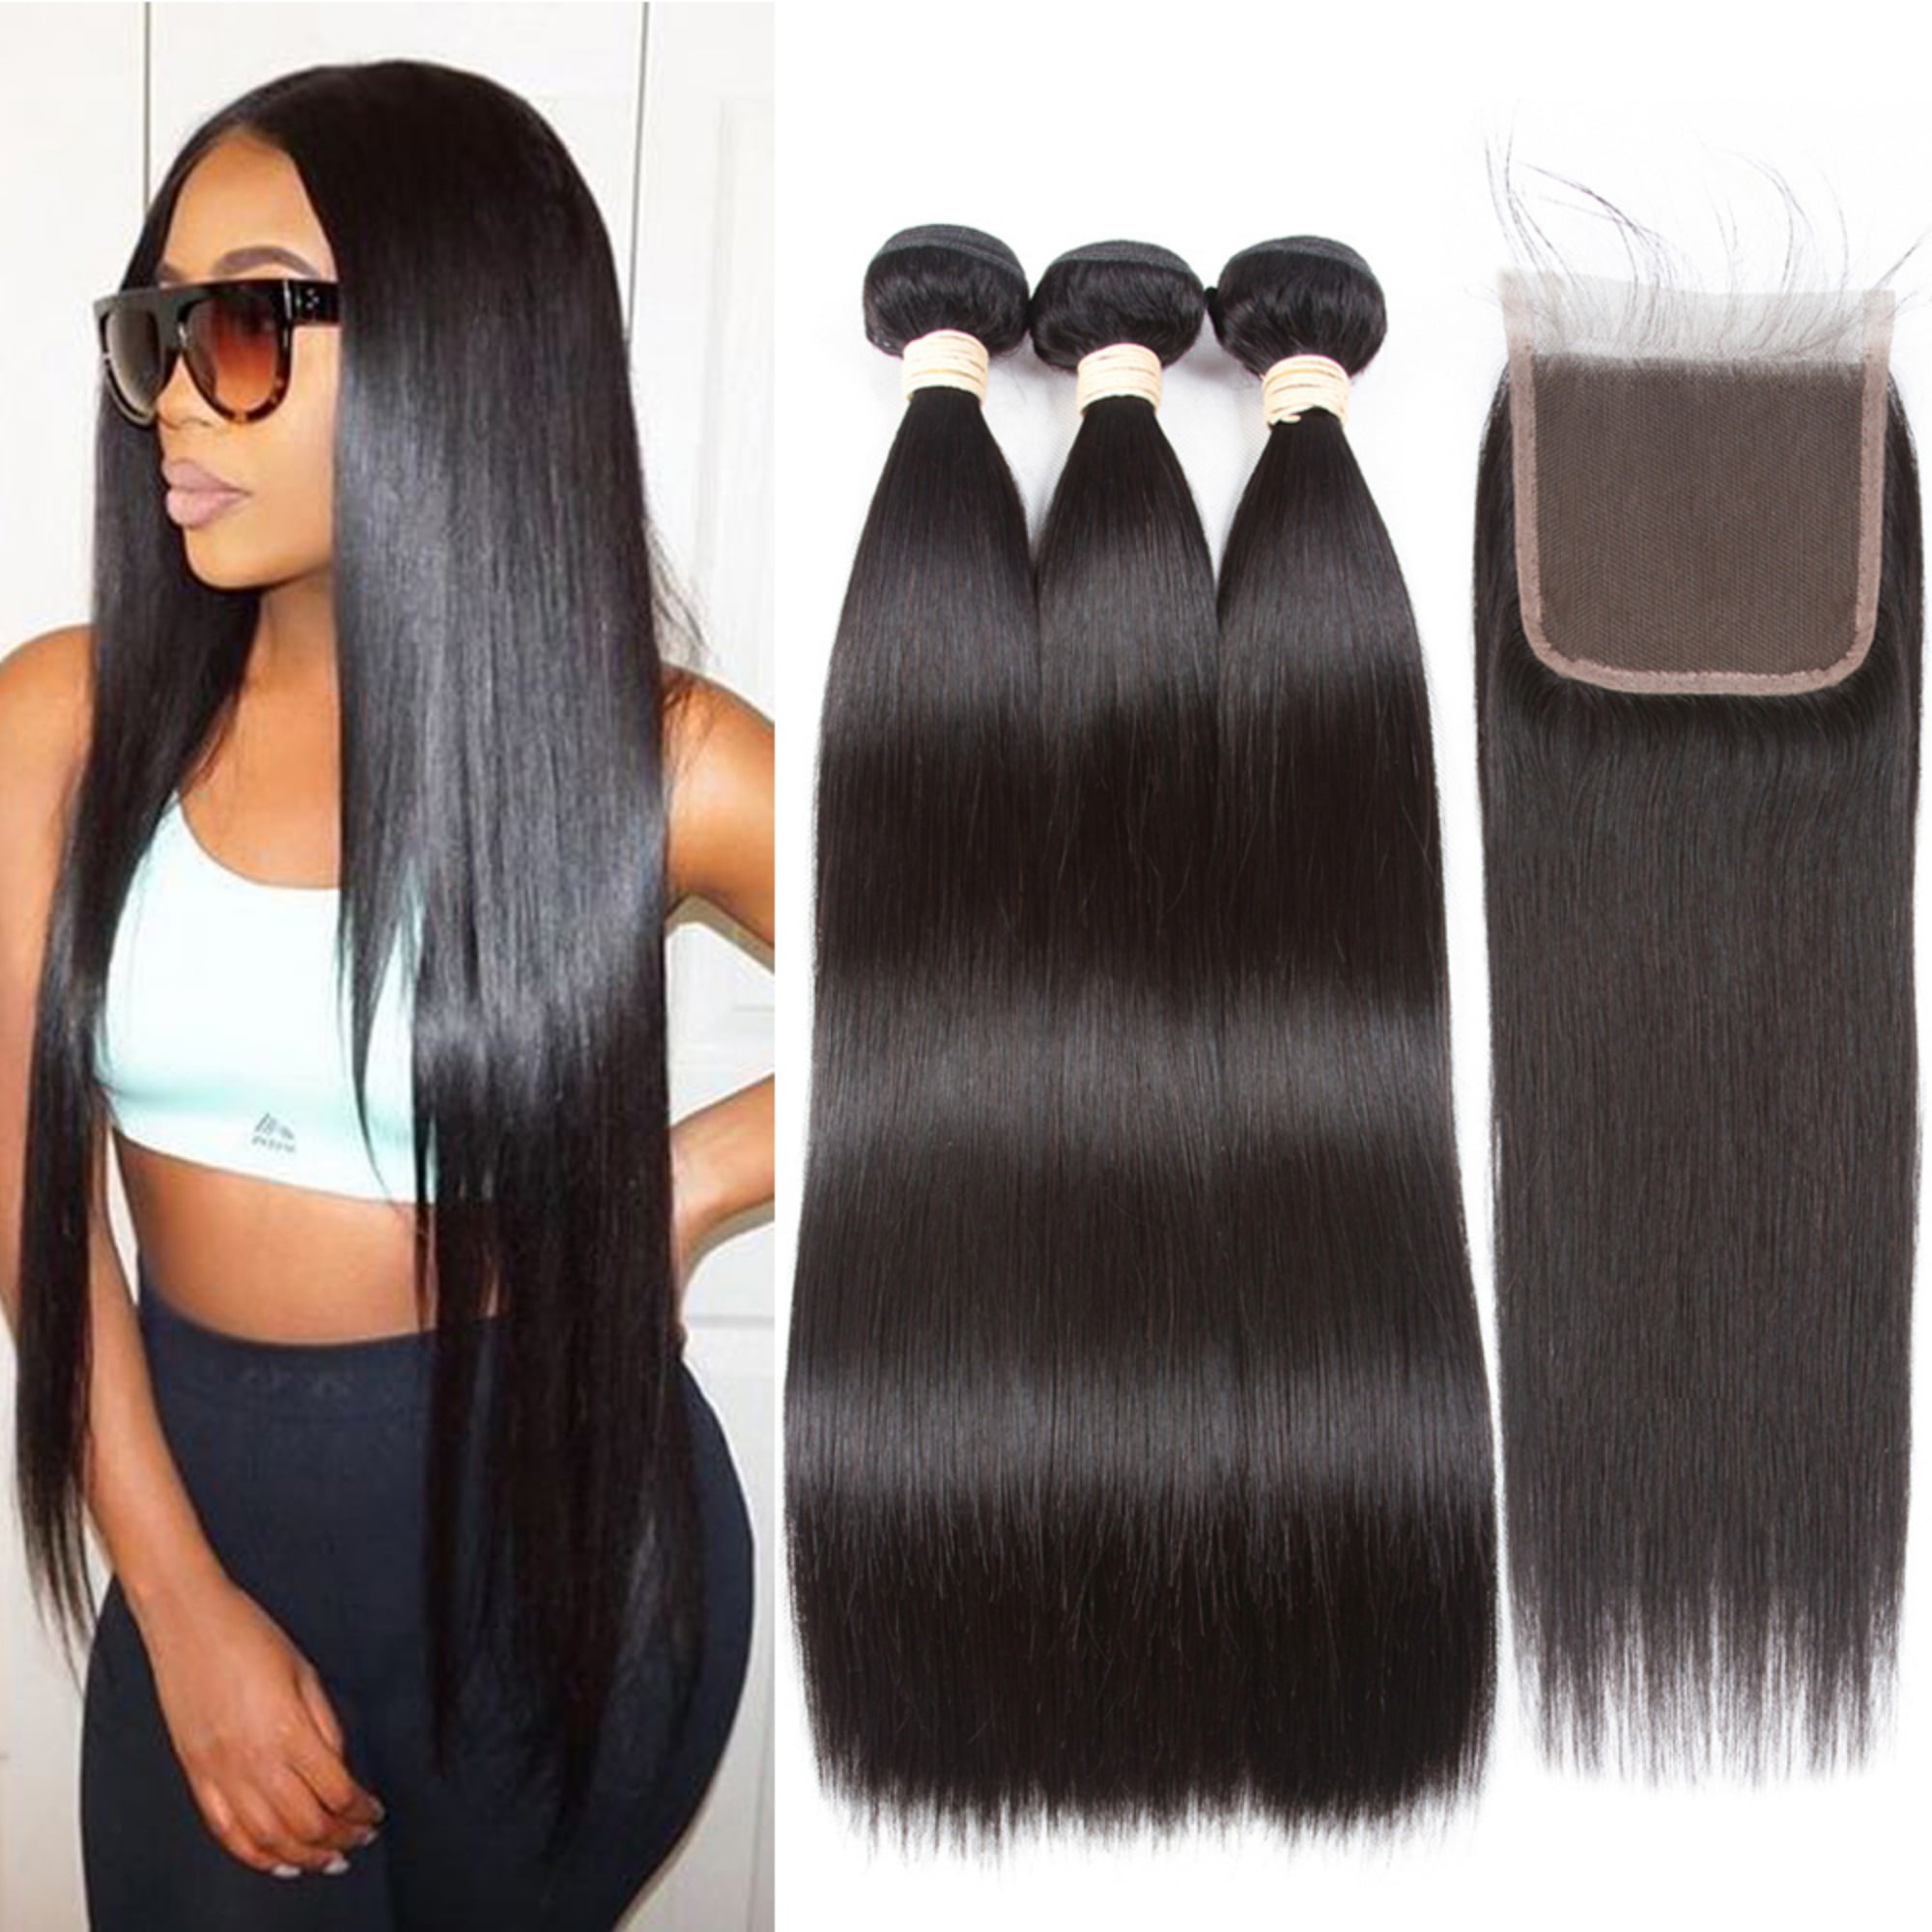 Beauhair 10A Brazillian Straight Human Hair 3 Bundles With Closure 4×4 Human  Hair Extensions with Closure Natural Color 26